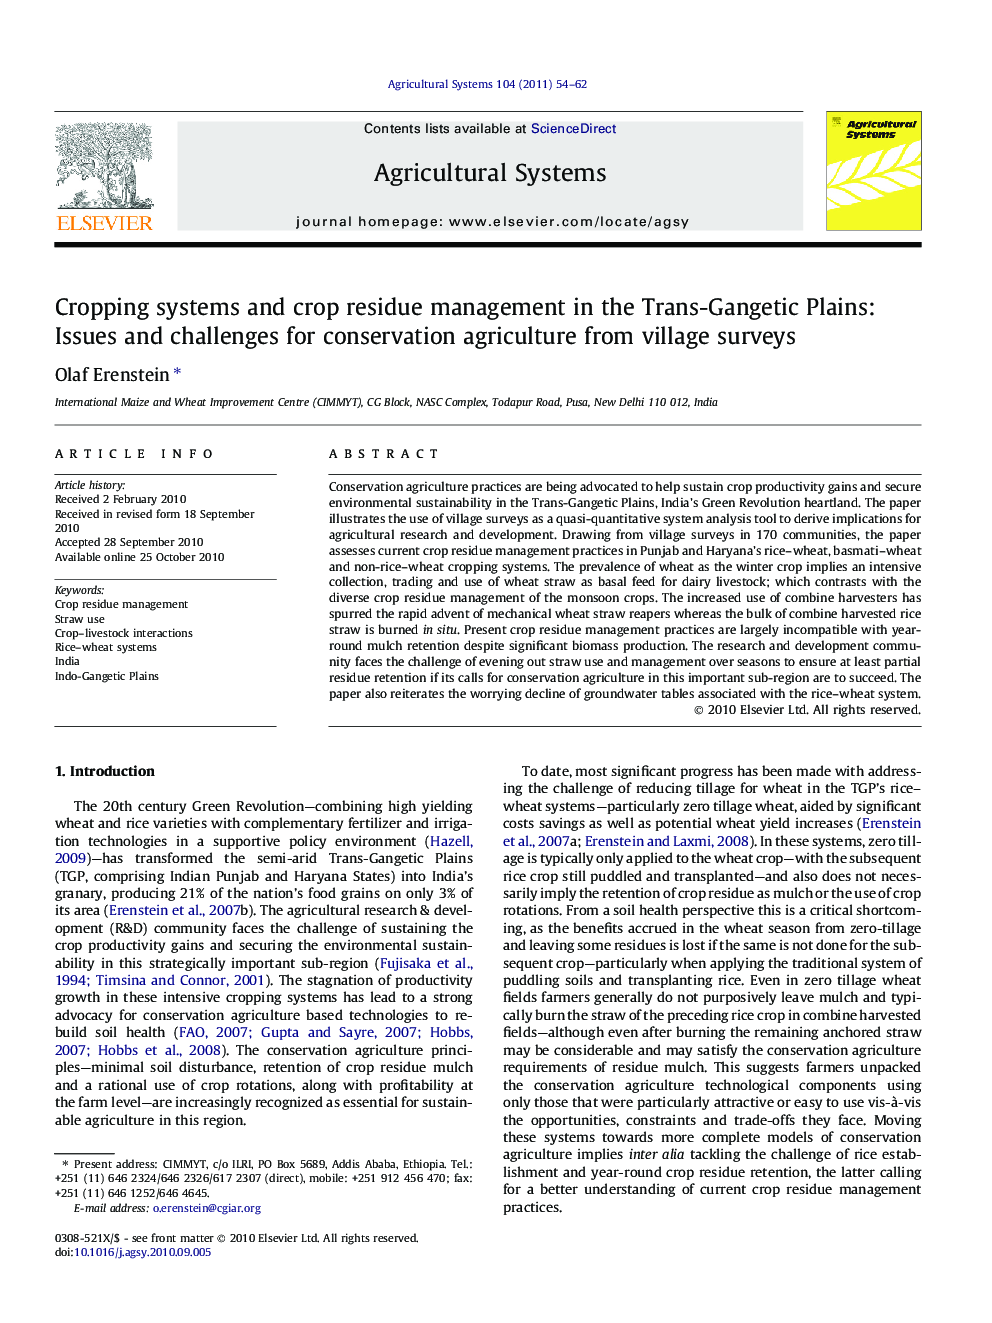 Cropping systems and crop residue management in the Trans-Gangetic Plains: Issues and challenges for conservation agriculture from village surveys